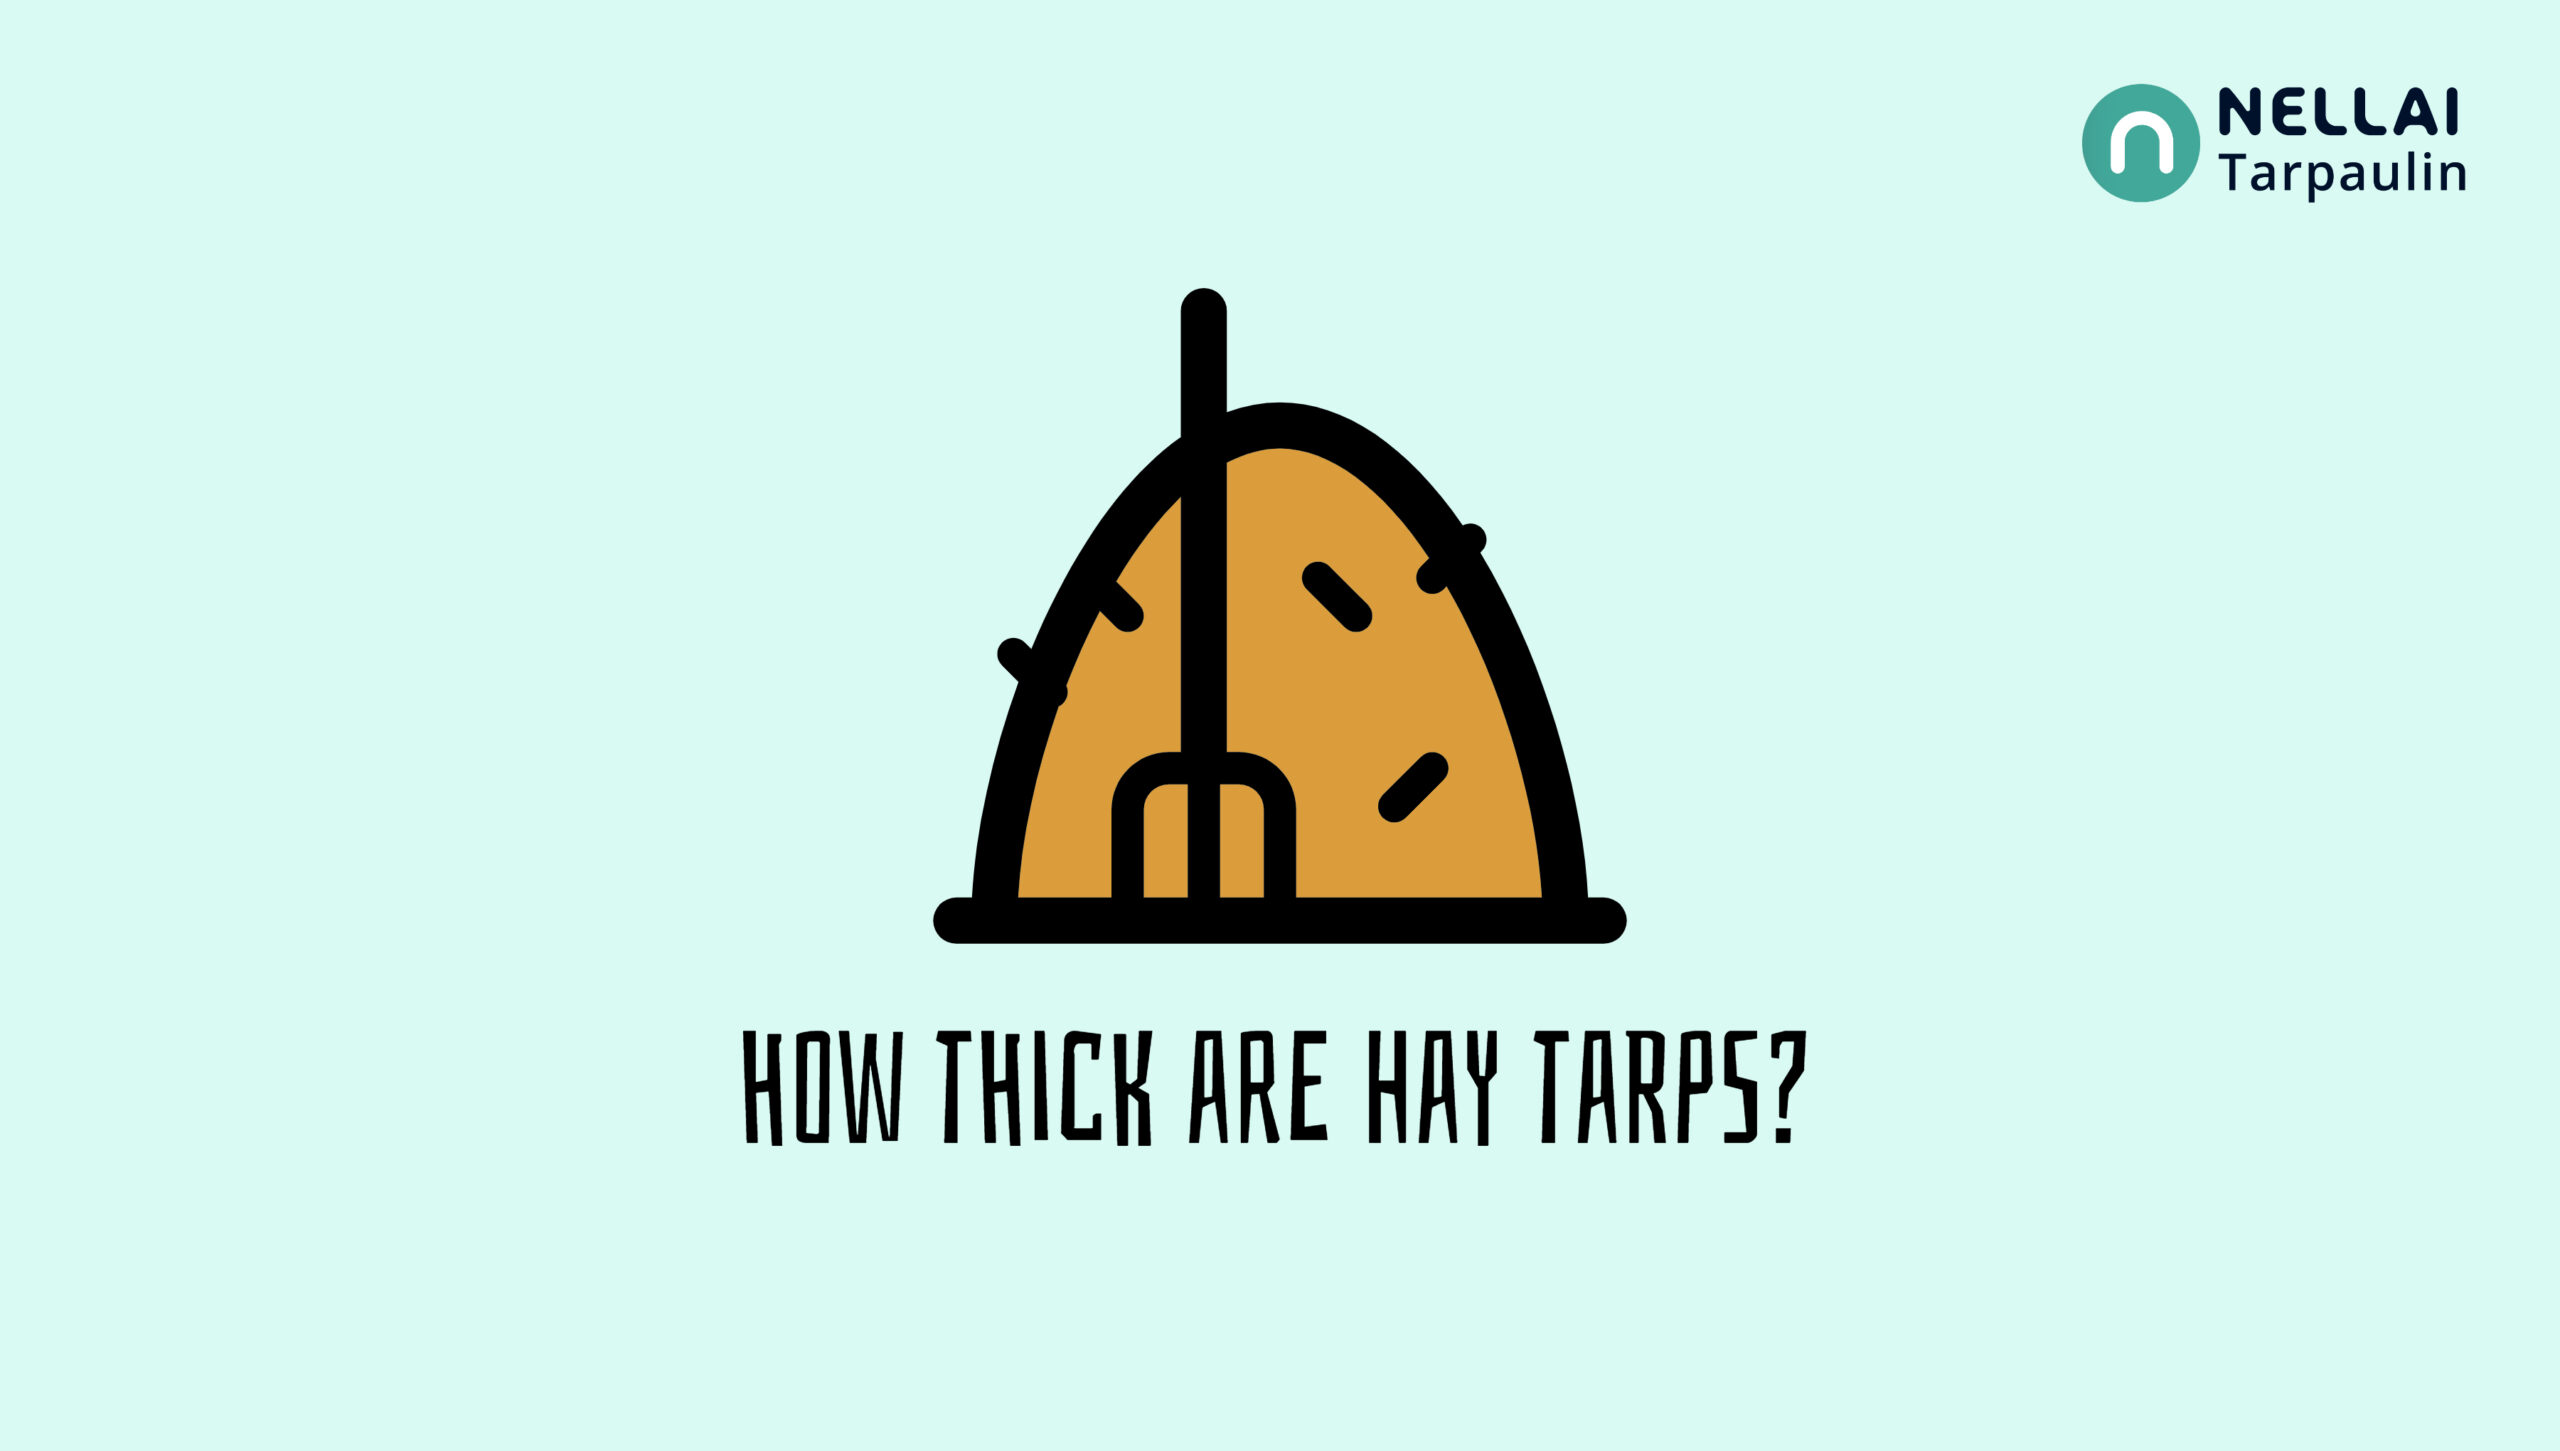 How thick are hay tarps?